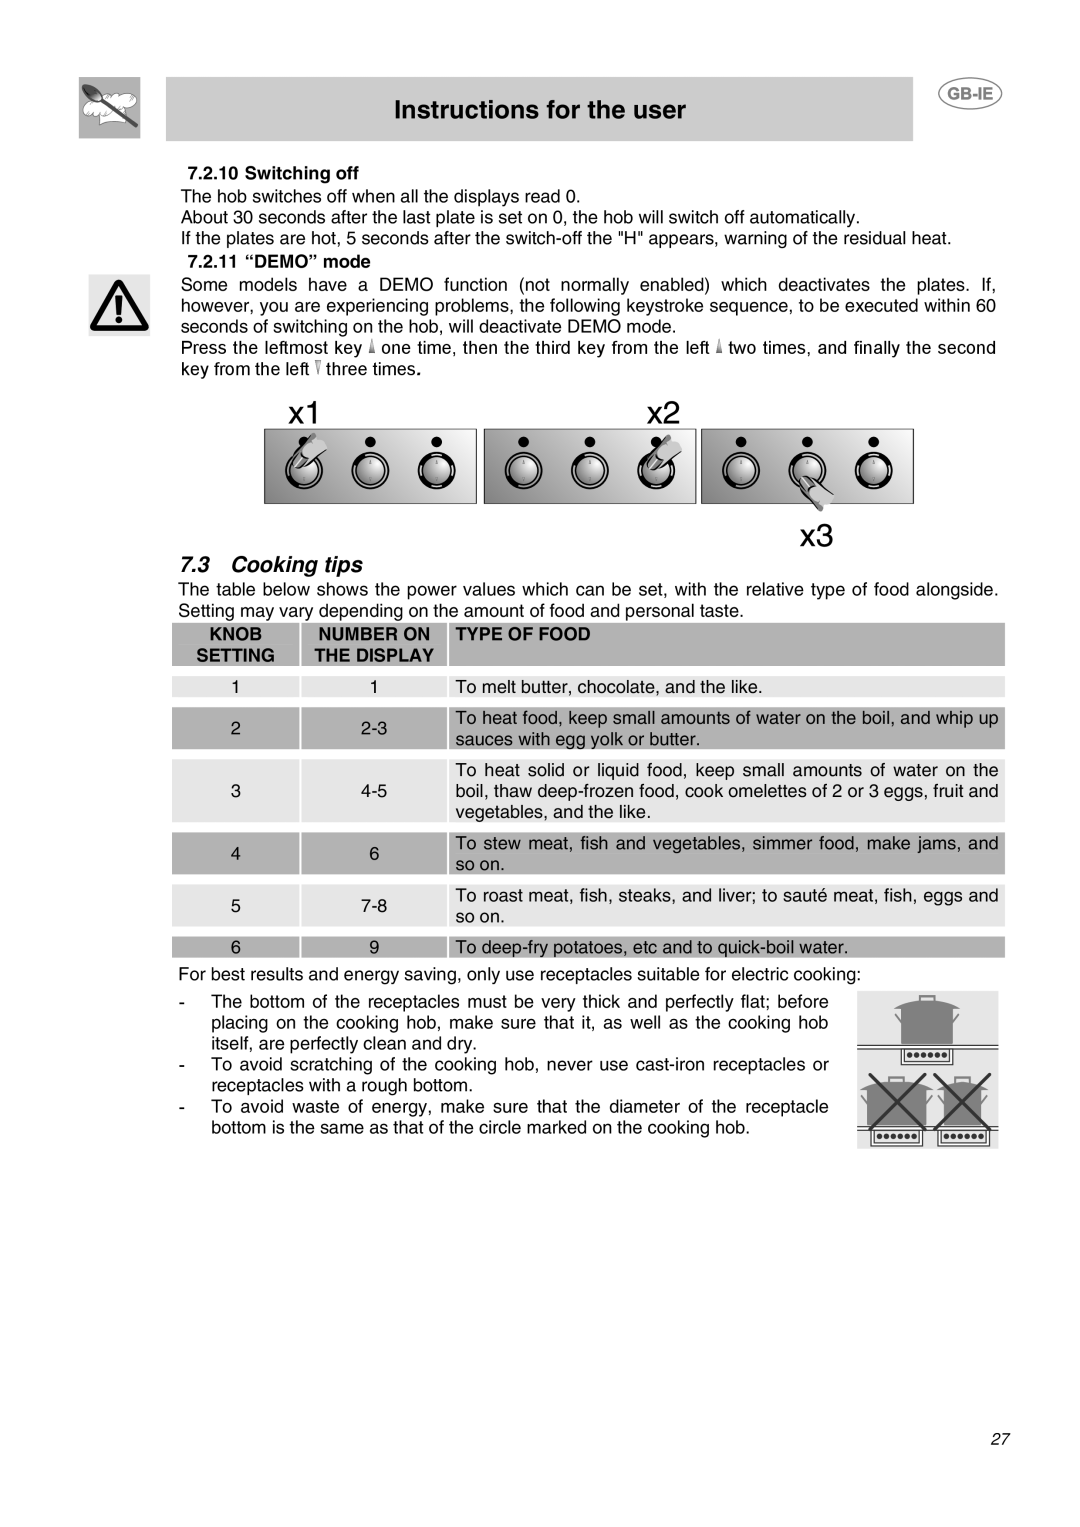 Smeg P662-1, P652 Instructions for the user, Switching off, 7.2.11 “DEMO” mode, Knob, Number On, Type Of Food, Setting 